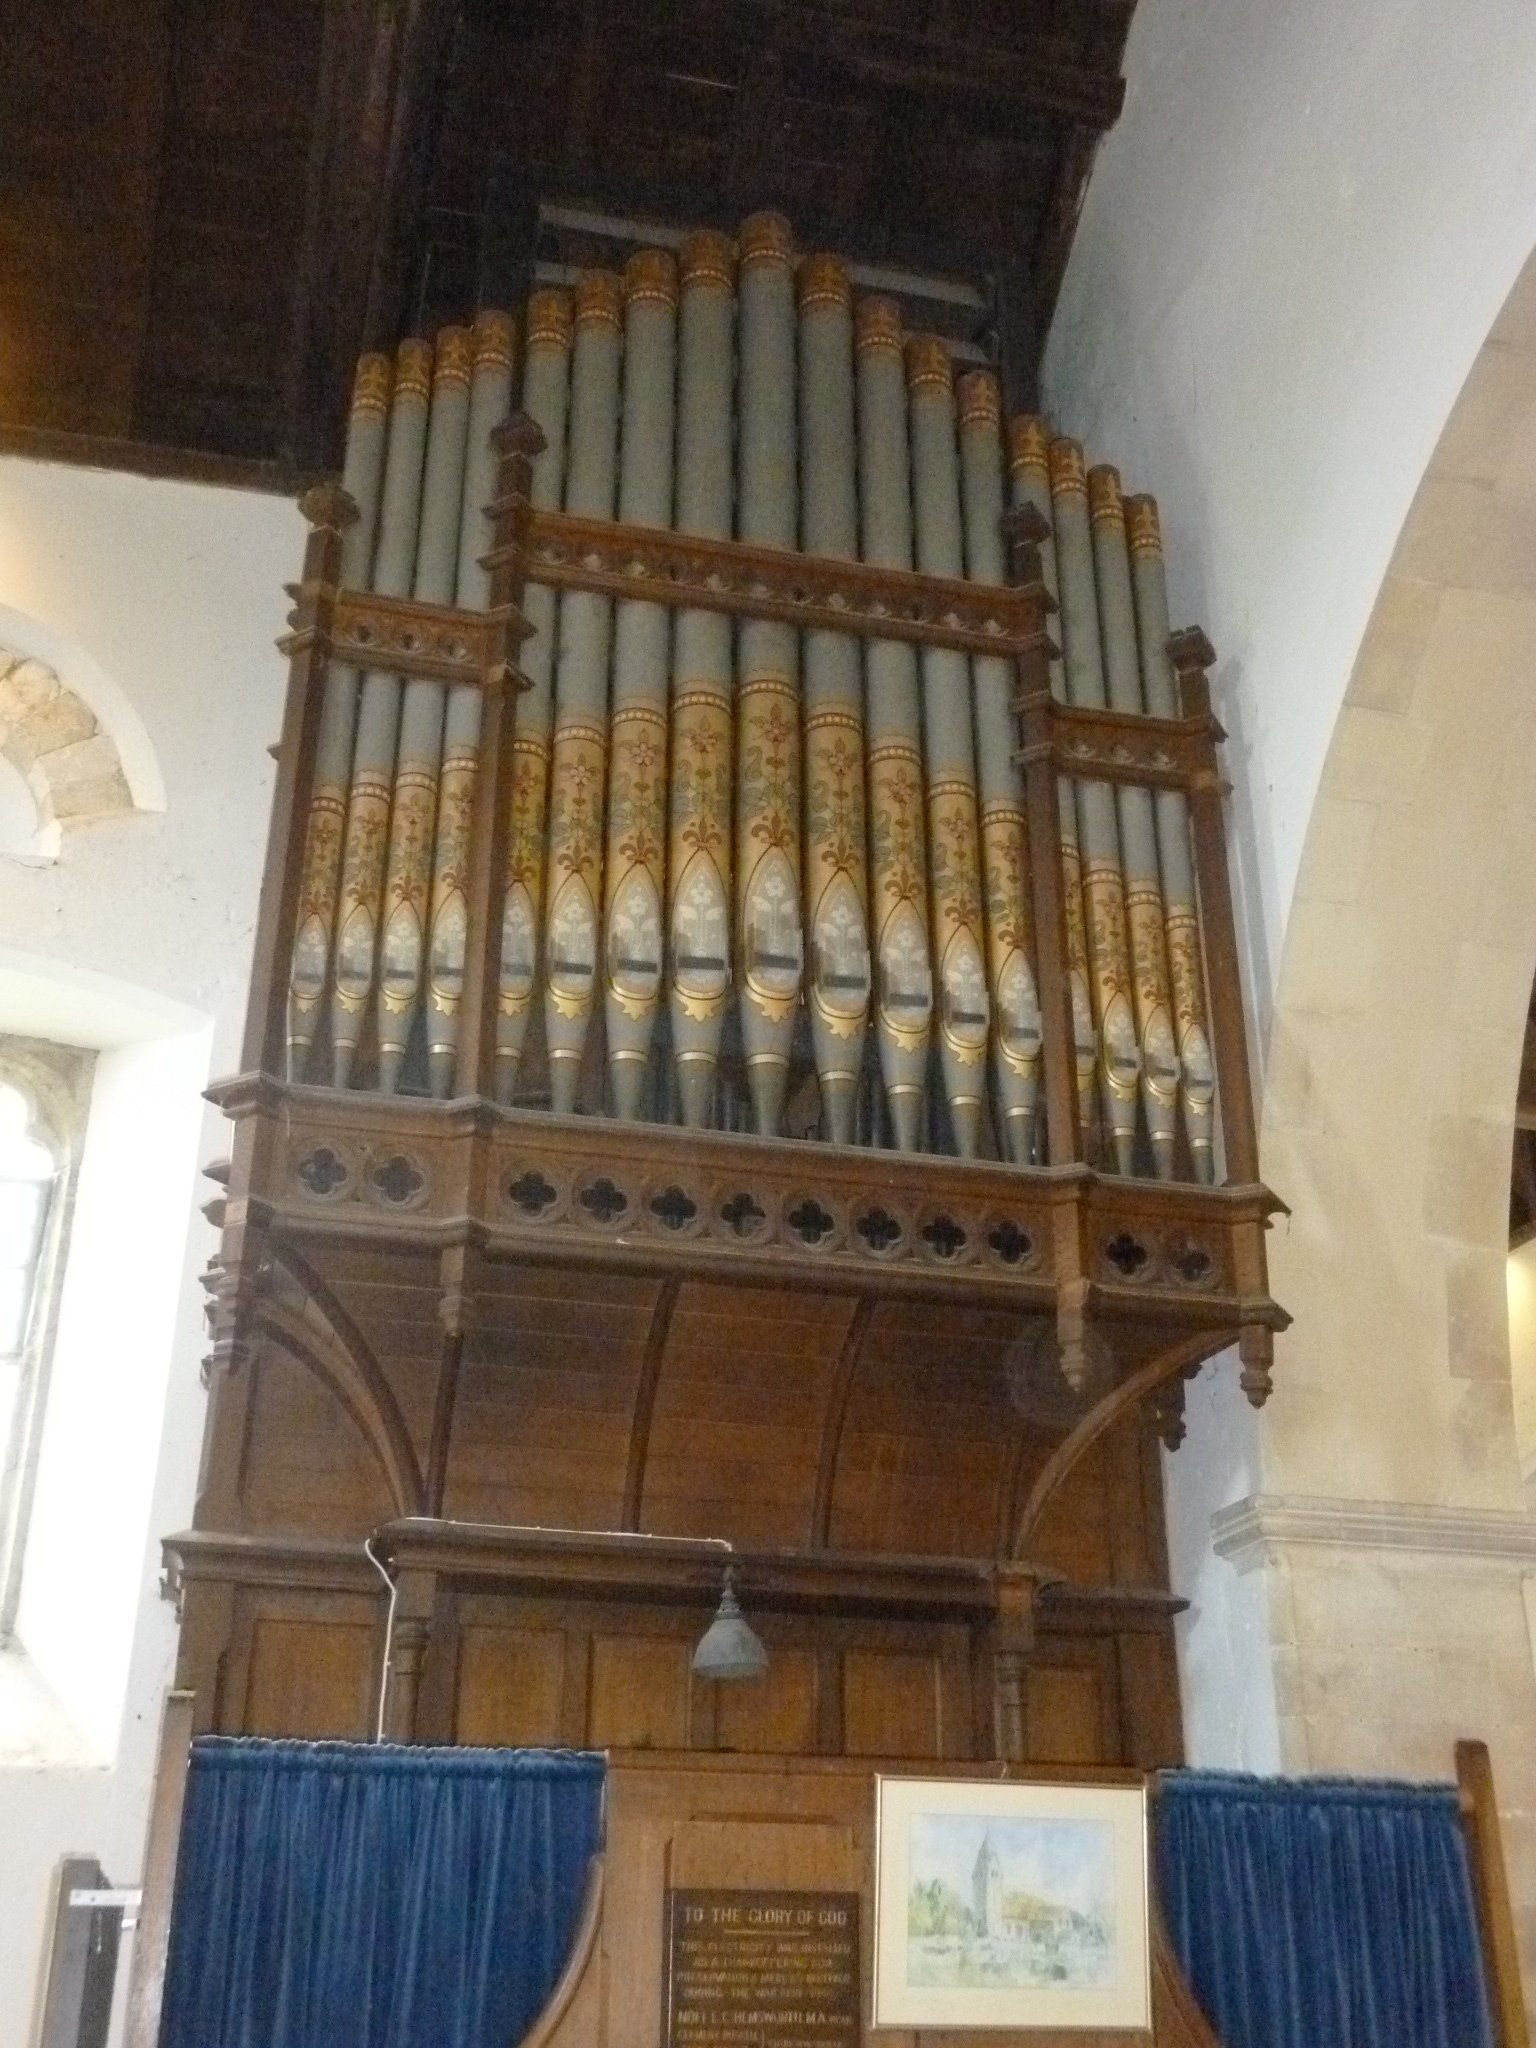 The organ (St Mary's Church, Sompting)